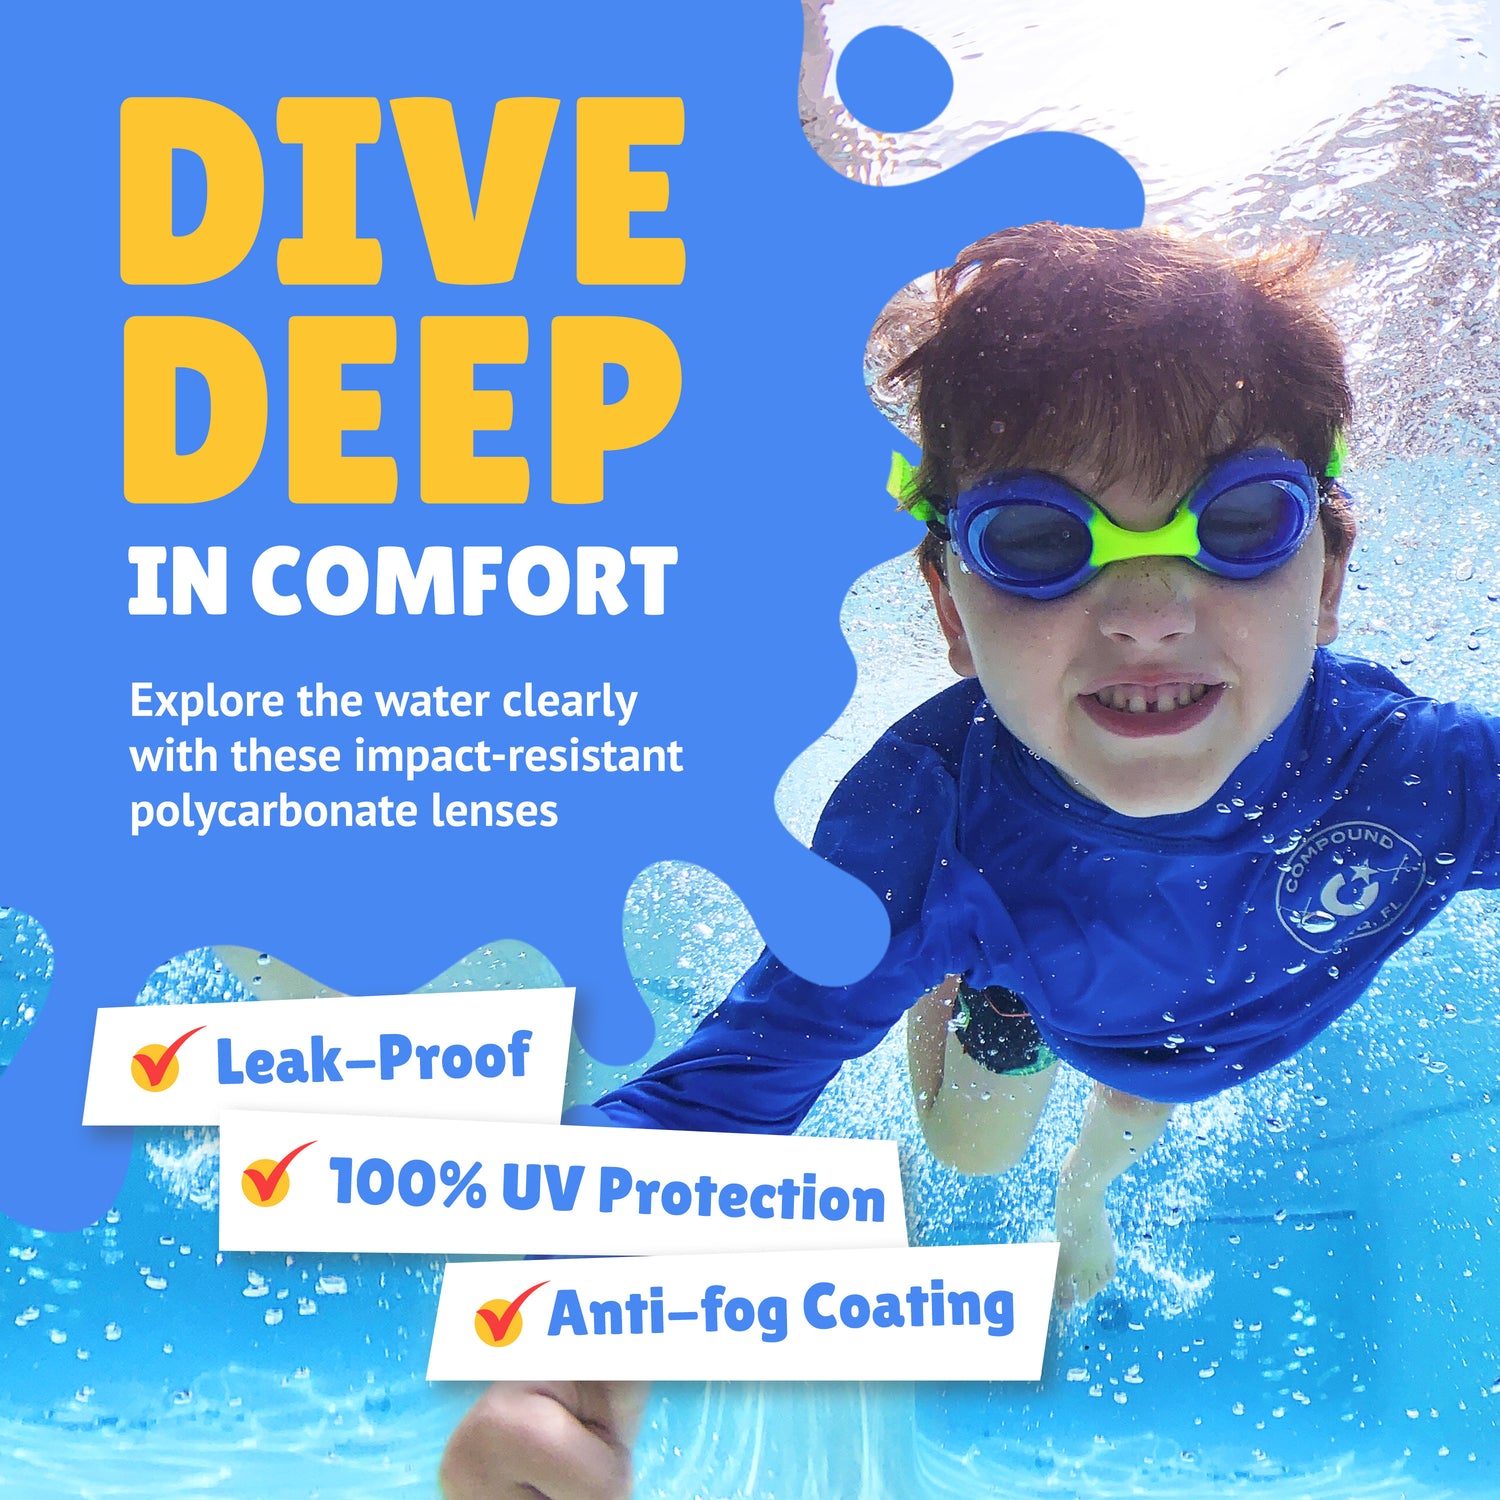 Boy smiling at camera while underwater wearing blue Frogglez Swim Goggles. Text reads: Dive Deeop in comfort. Explore the water clearly with these impact-resistant polycarbonate lenses. Leak-proof, 100% UV protection, Anti-fog coating.